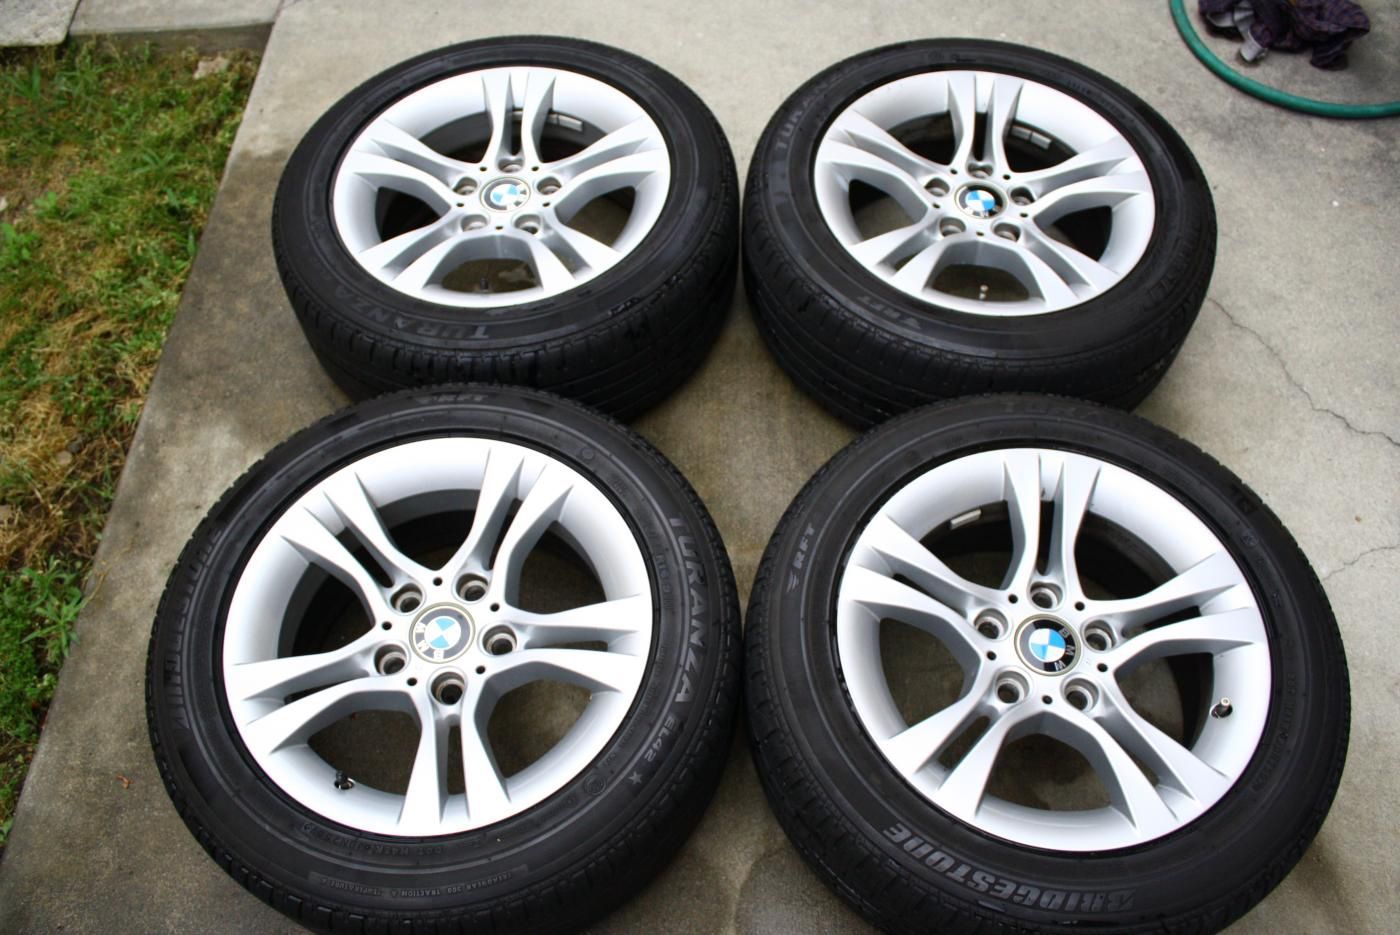 Bmw OEM rims for sale with tires